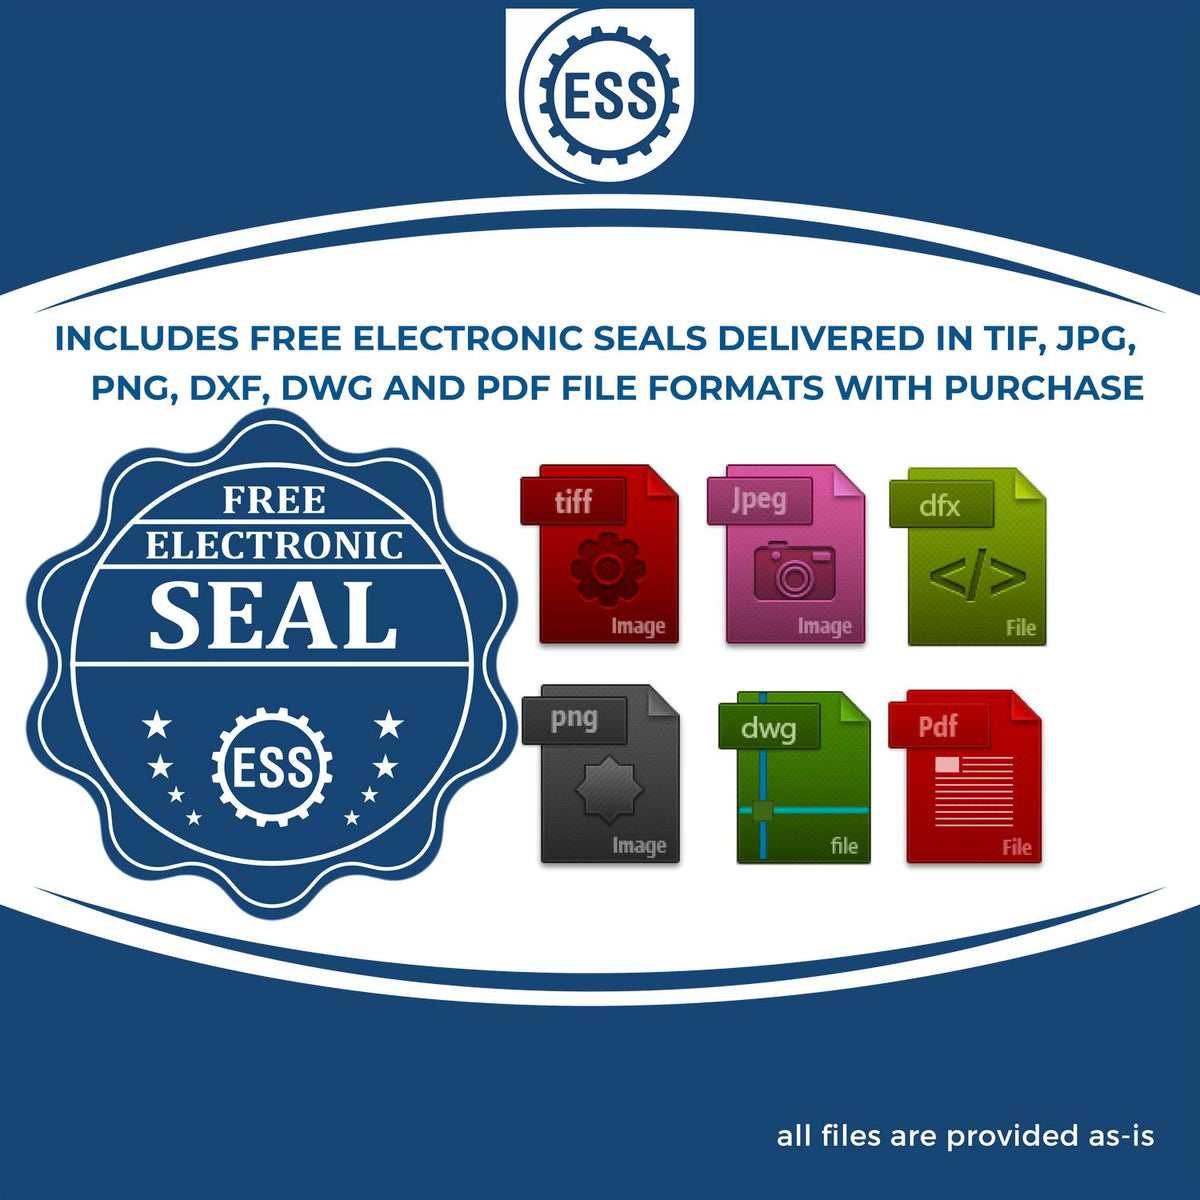 An infographic for the free electronic seal for the Hybrid Missouri Landscape Architect Seal illustrating the different file type icons such as DXF, DWG, TIF, JPG and PNG.